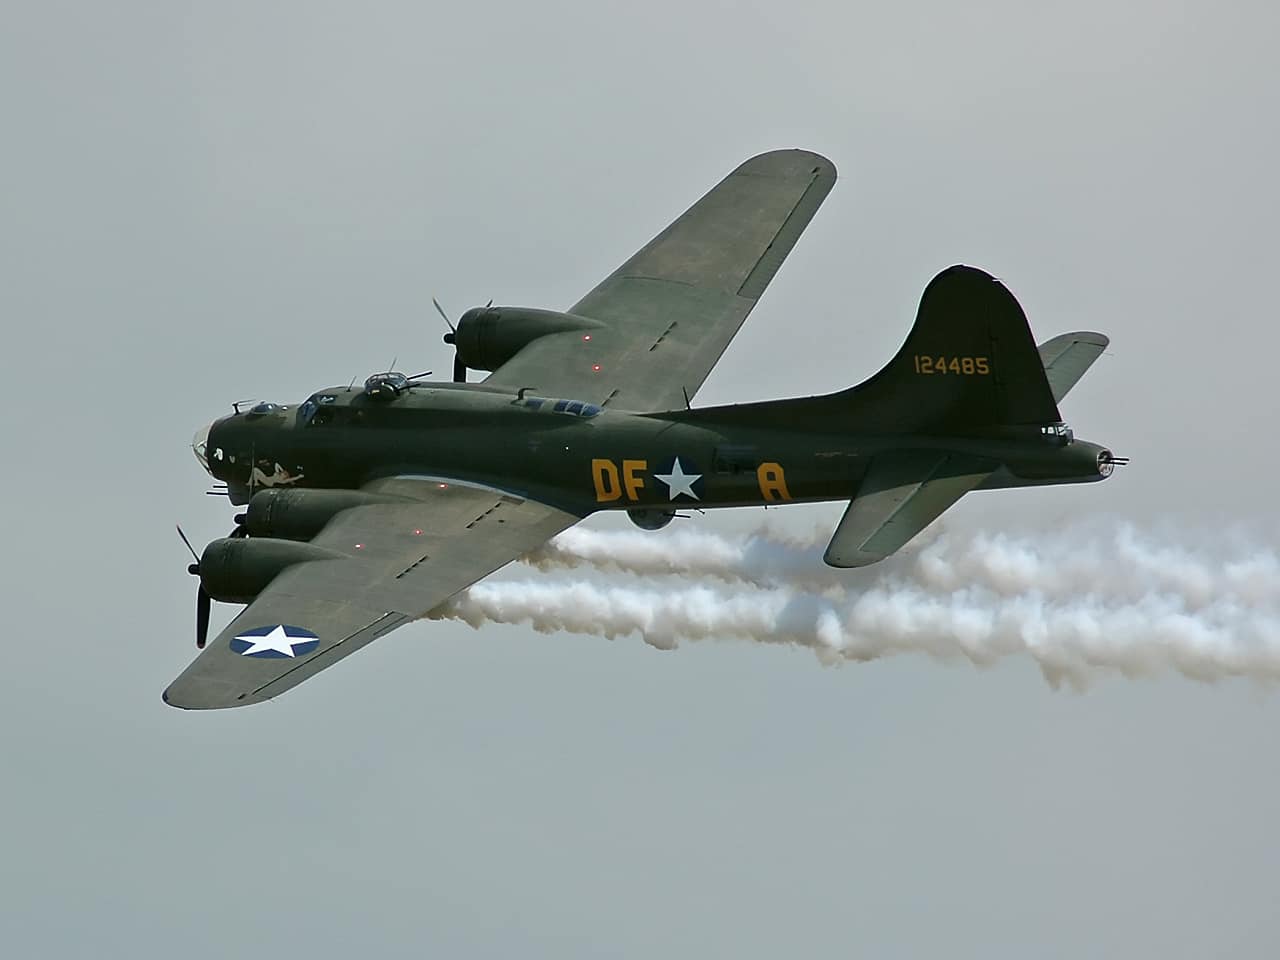 The Wings of Freedom Tour, featuring vintage World War II aircraft, is on display at the Westchester County Airport.